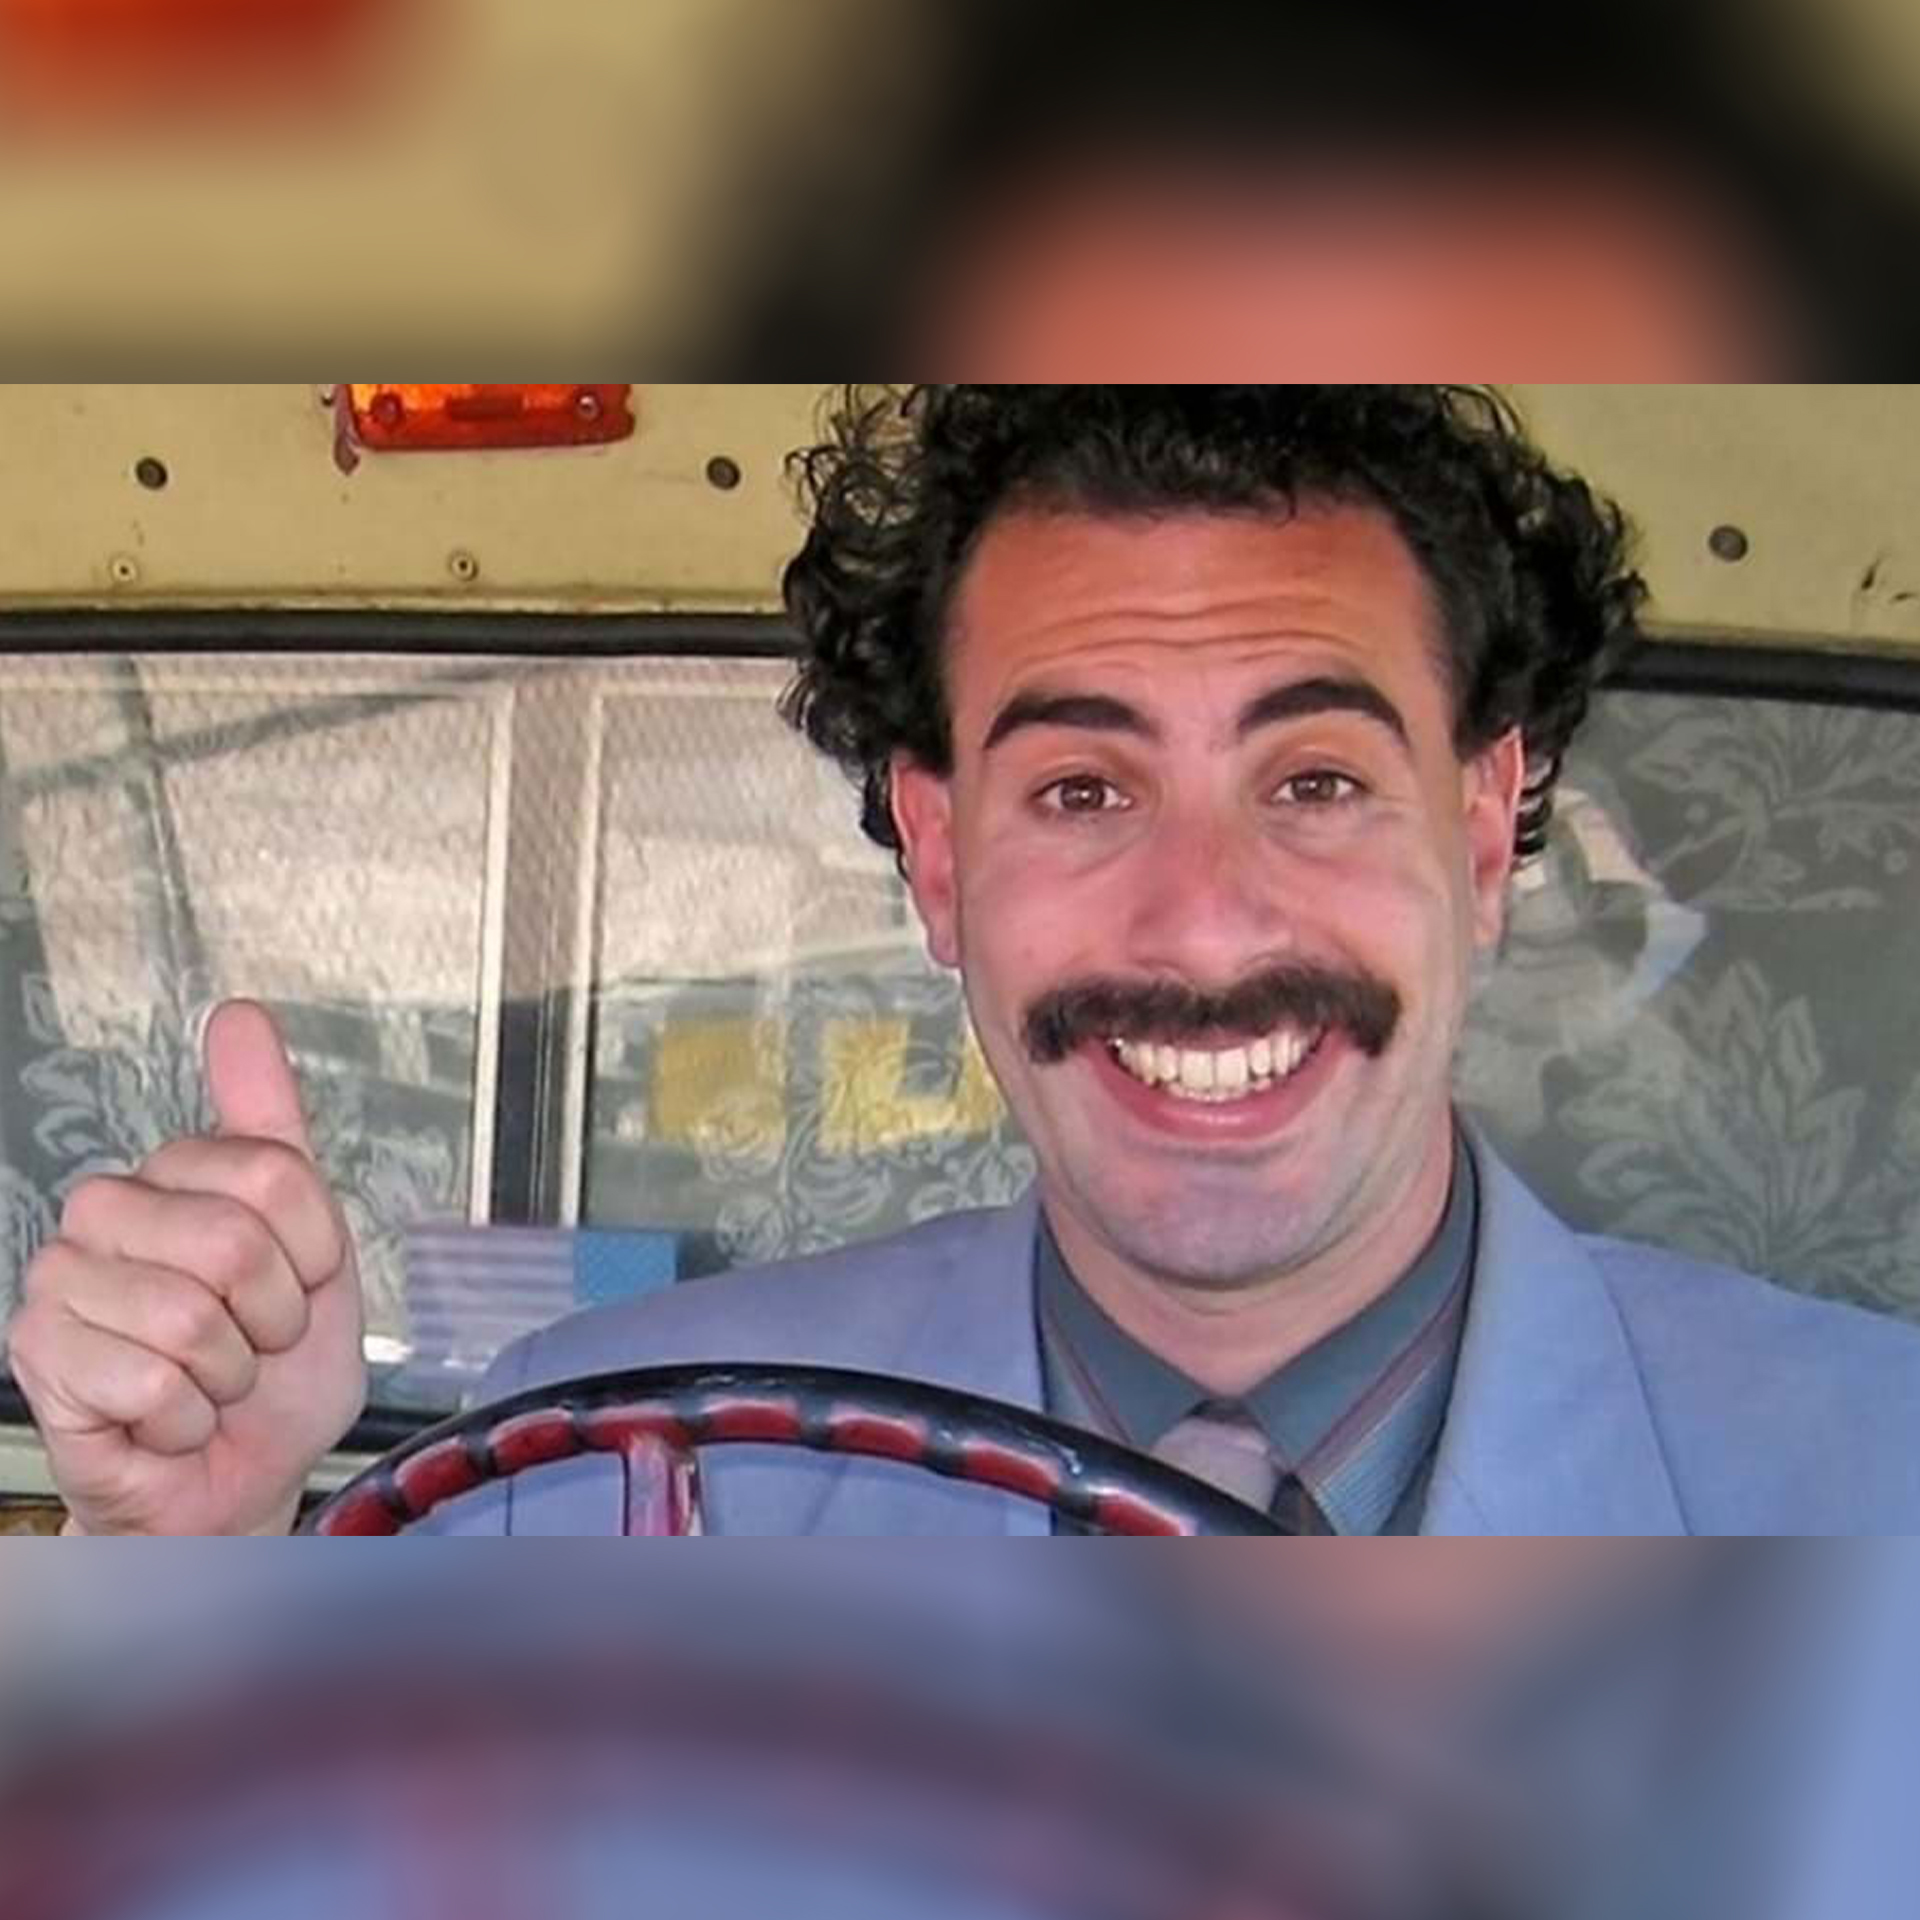 HIGHLIGHT: Kazakhstan Adopted Borat's Catchphrase For A Tourism Ad So We Did The Same For These Perth Suburbs!